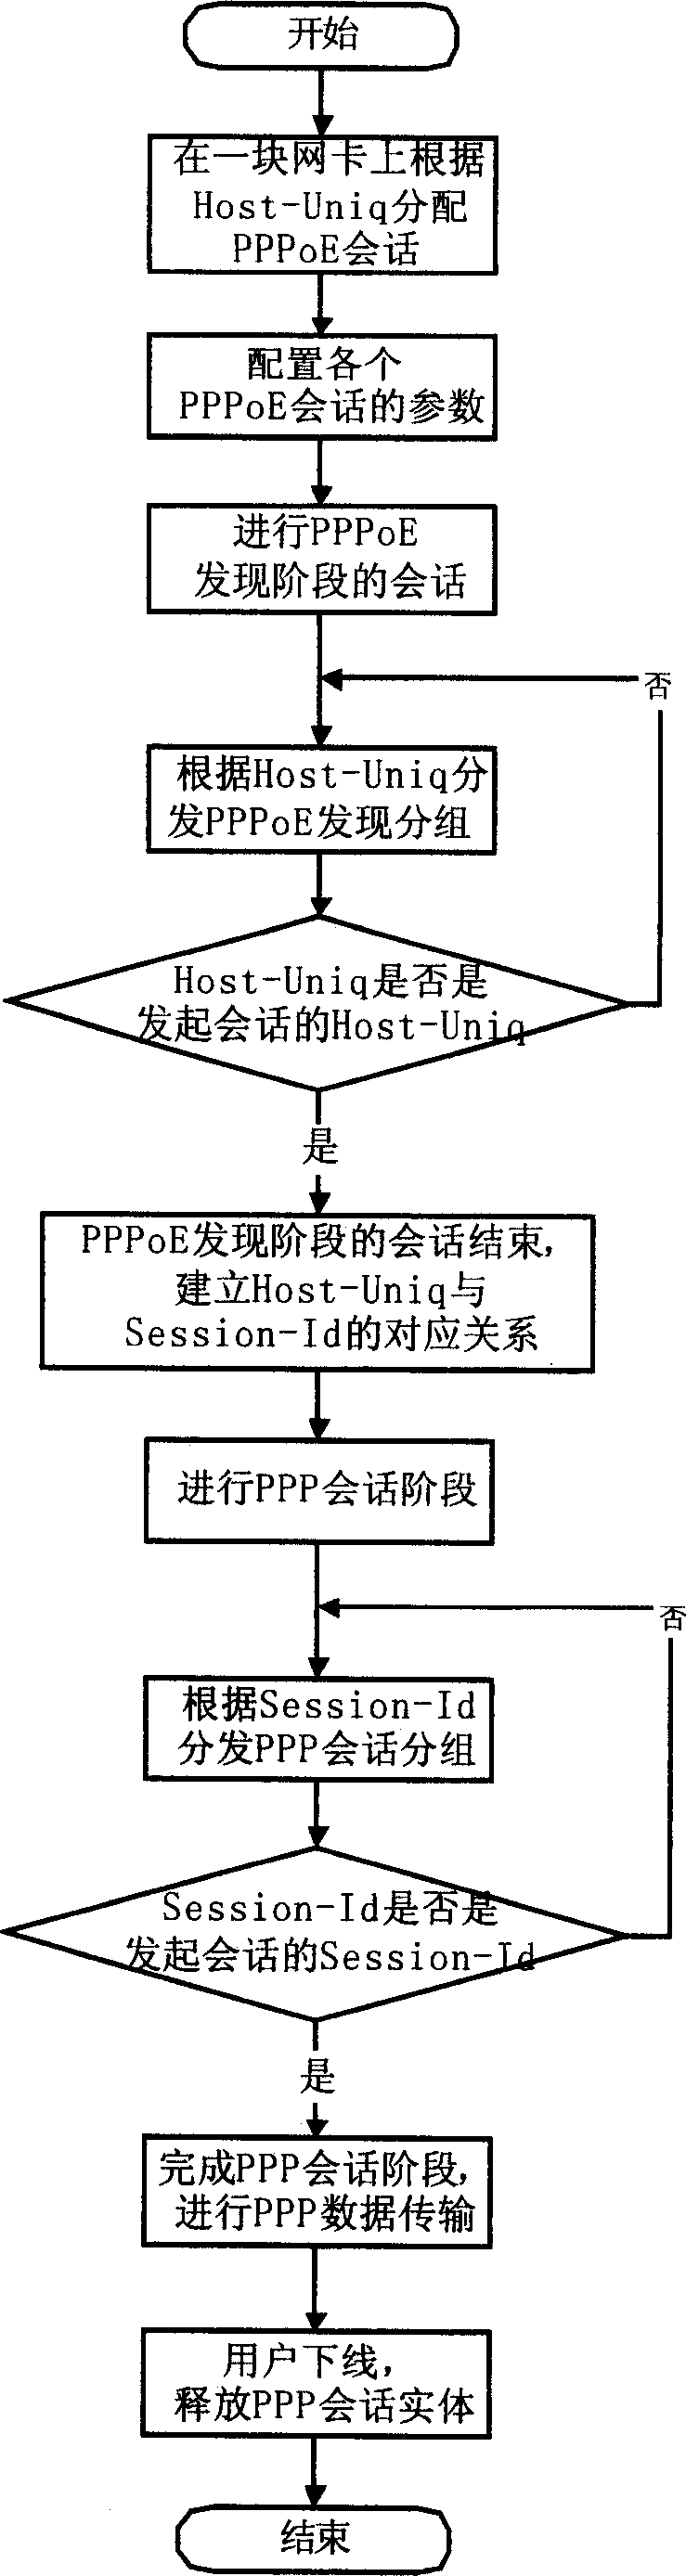 Method for point-to-point protocol service detection of wide band cut-in server